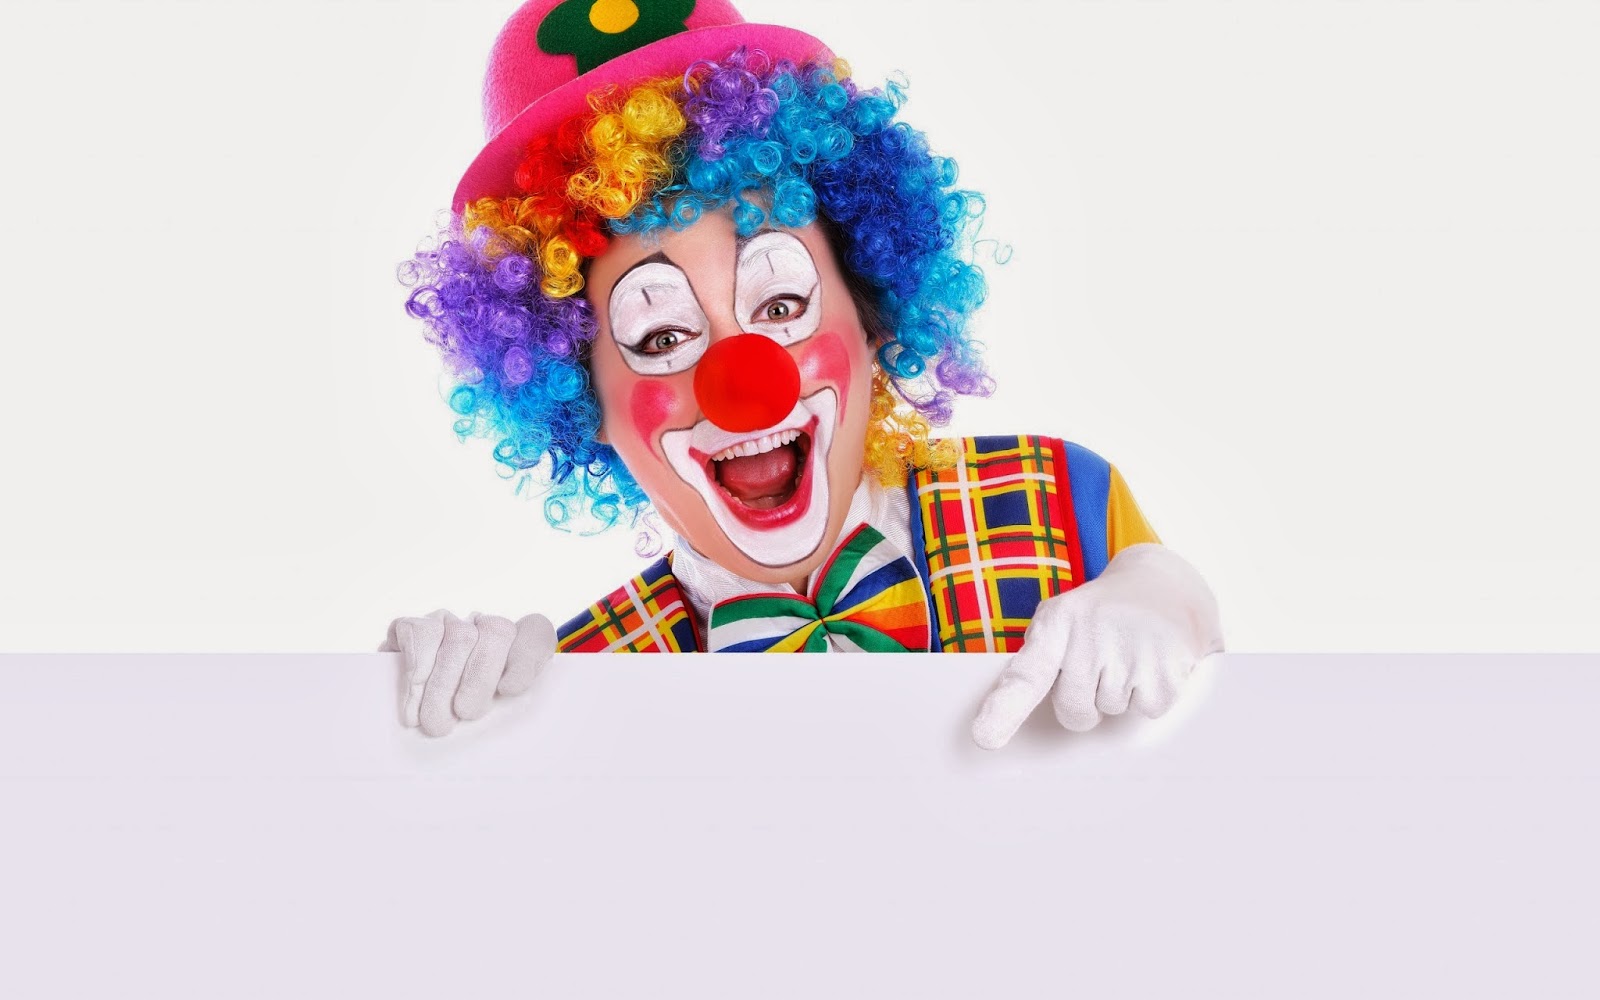 Related Pictures The Mcdonald S Clown Wallpaper Car